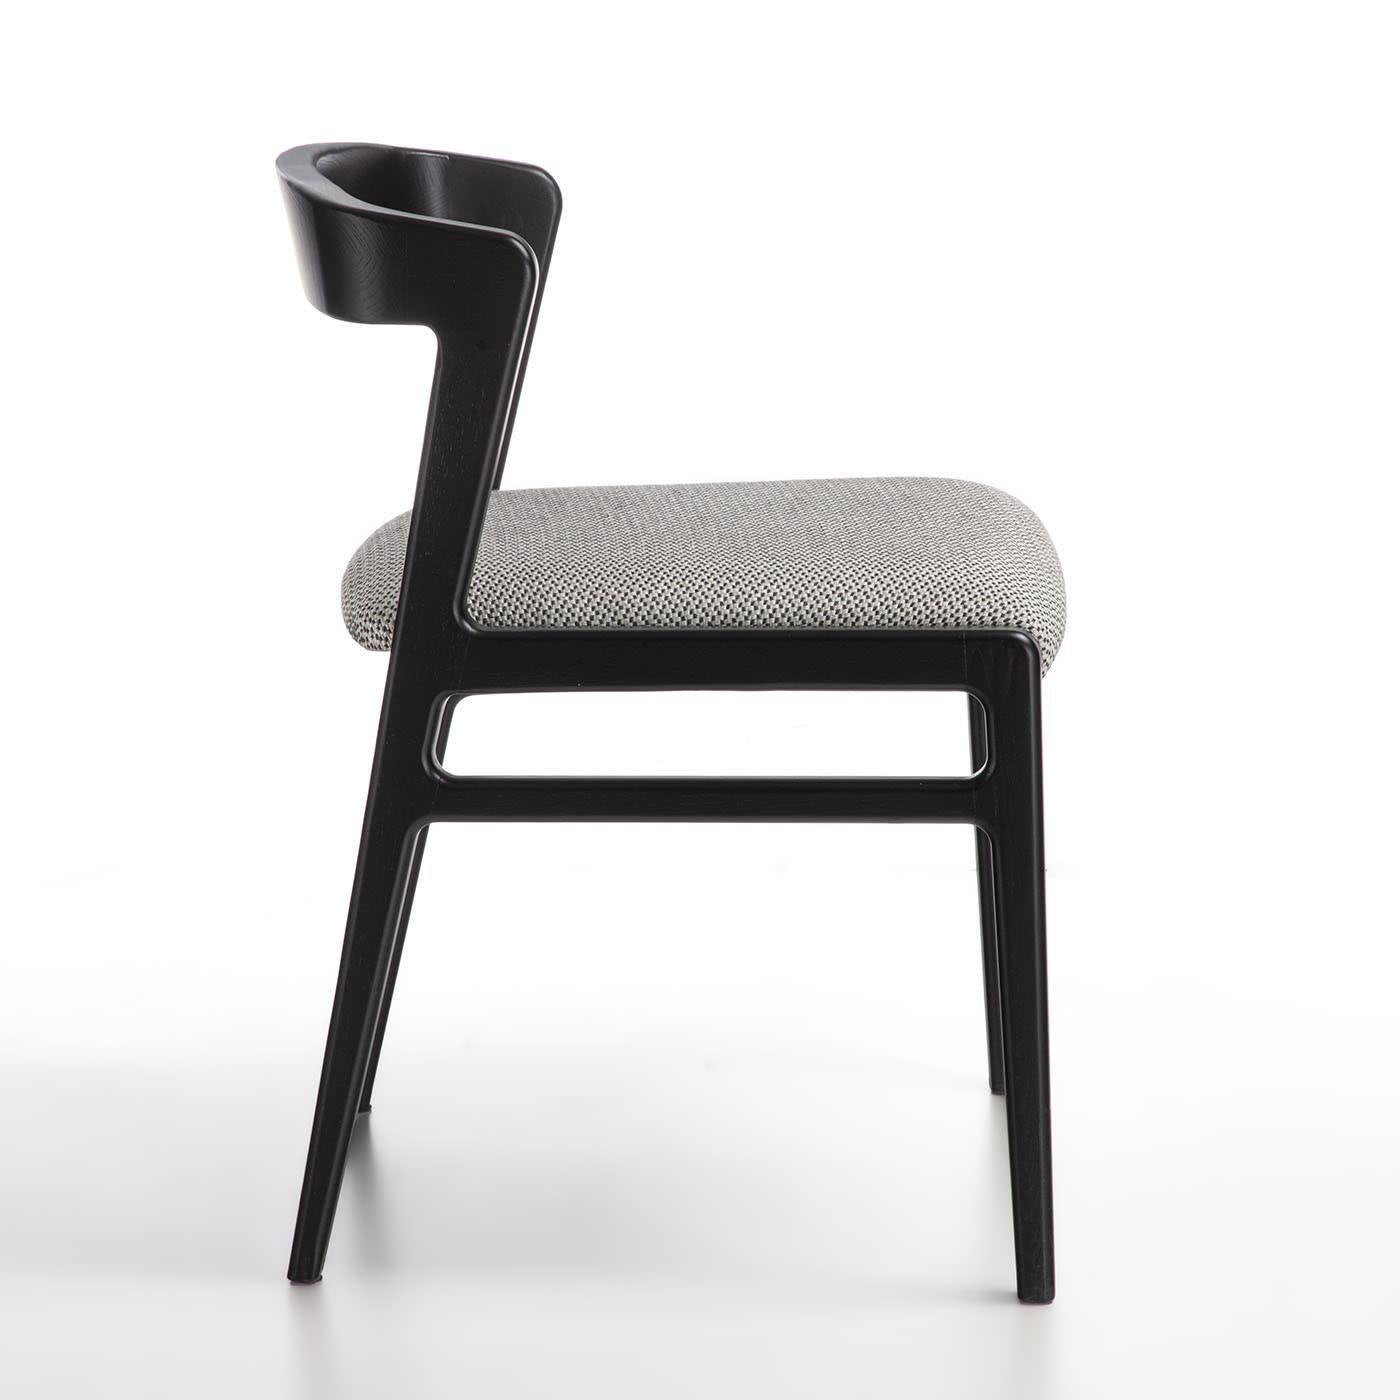 Chair from the Aida line with an essential and light design. Structure in solid wood and seat upholstered in fabric.